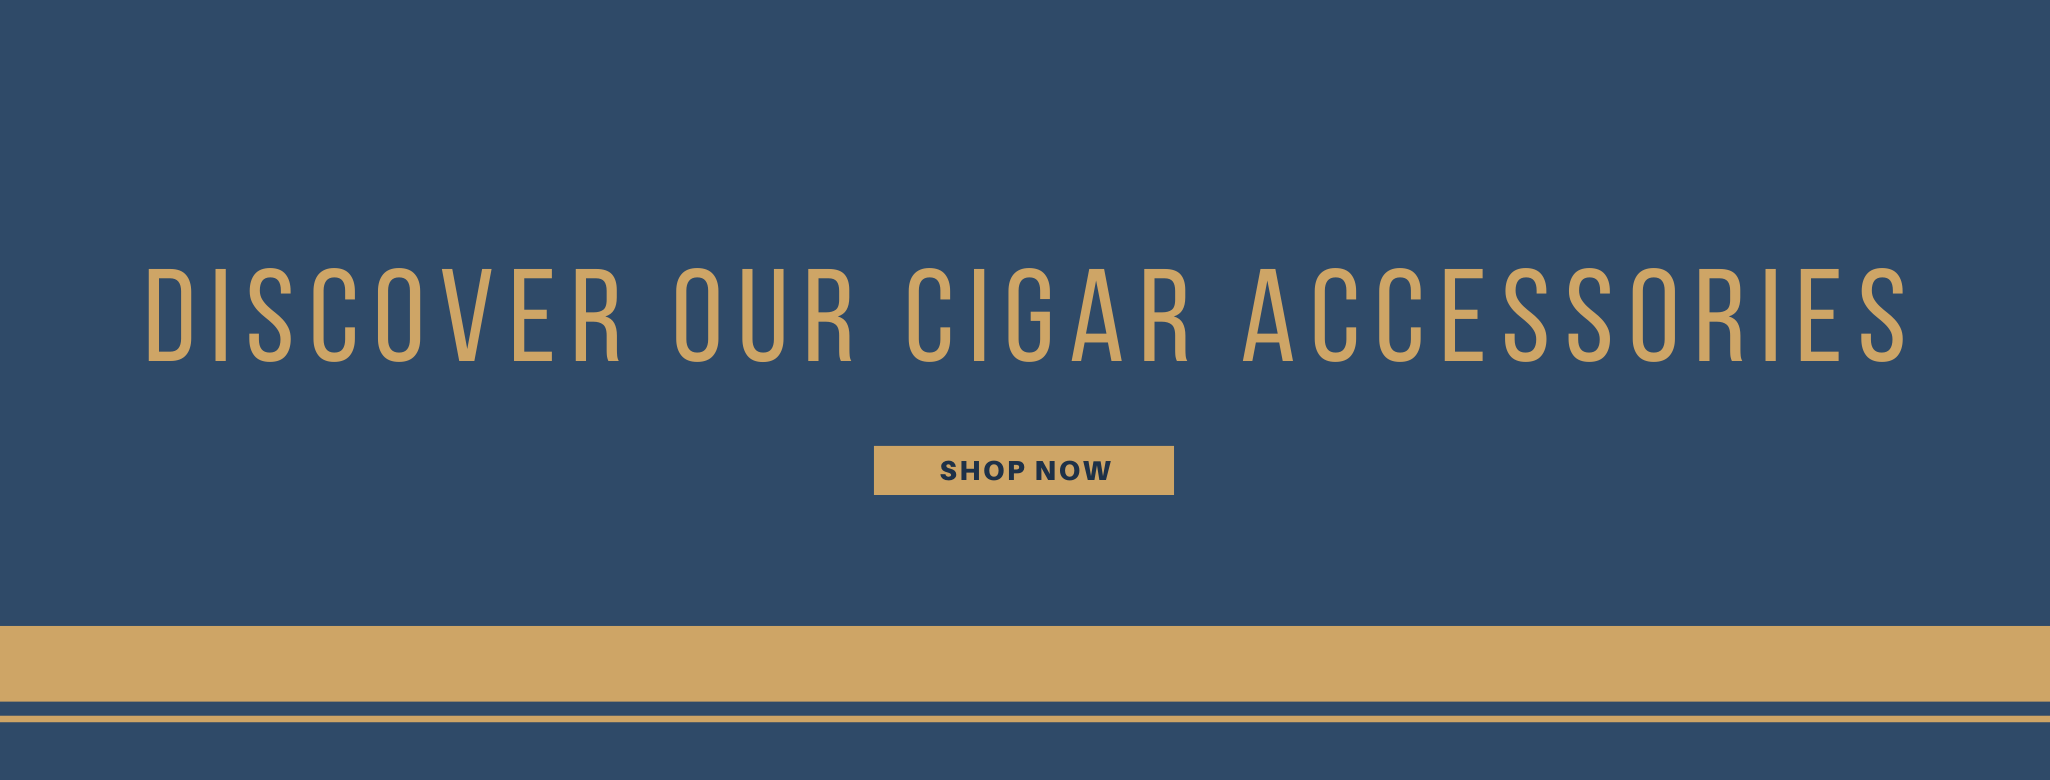 Discover our cigar accessories banner